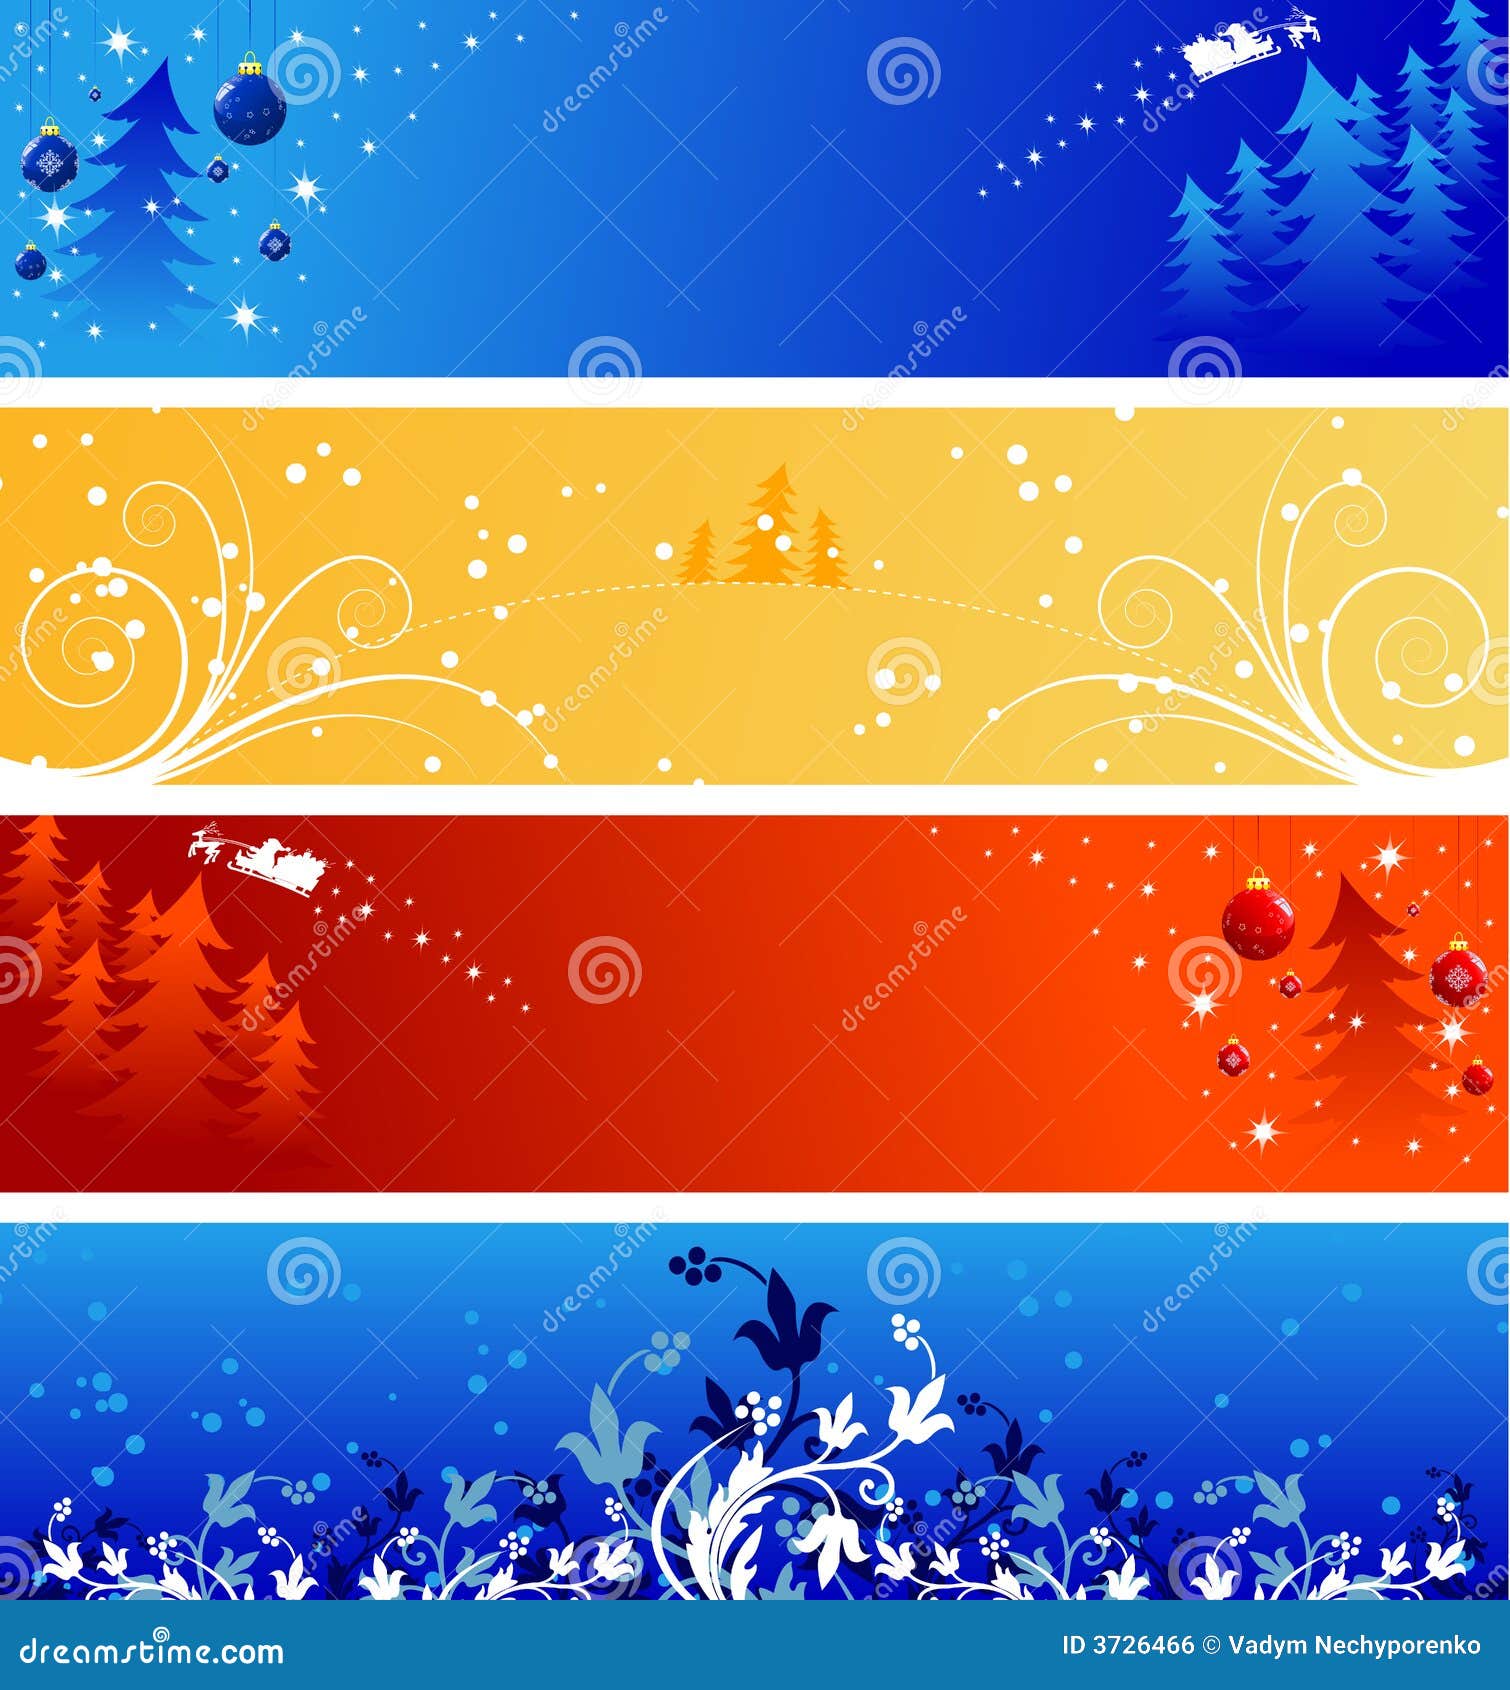 Winter Christmas banners stock vector. Illustration of cold - 3726466